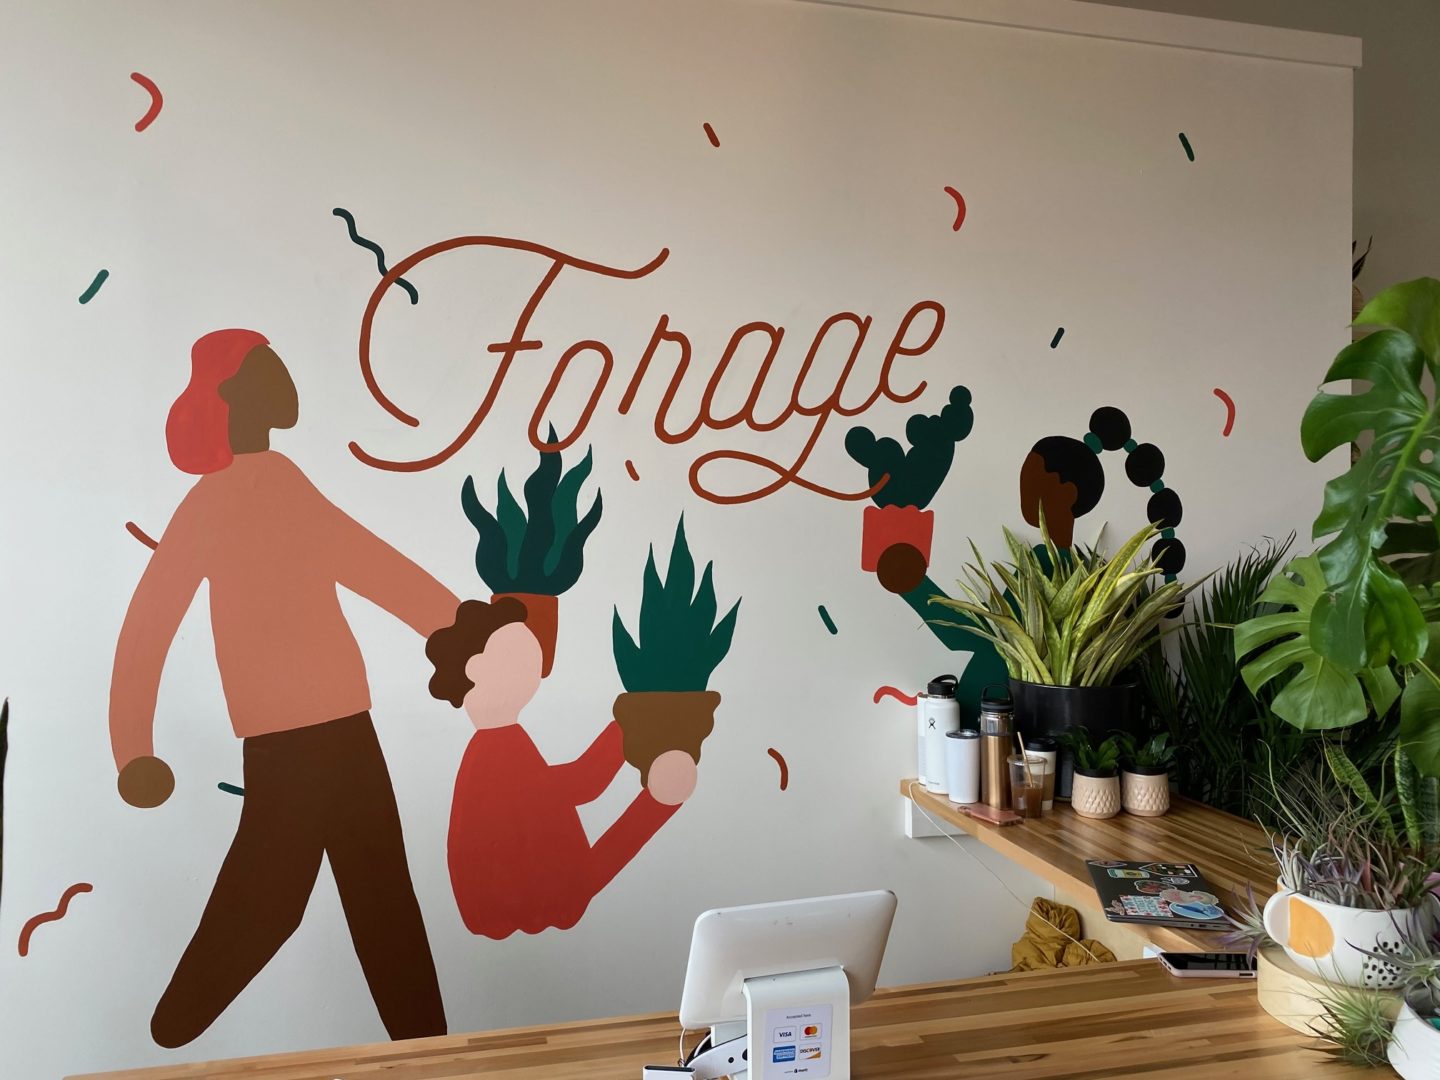 forage logo on the wall